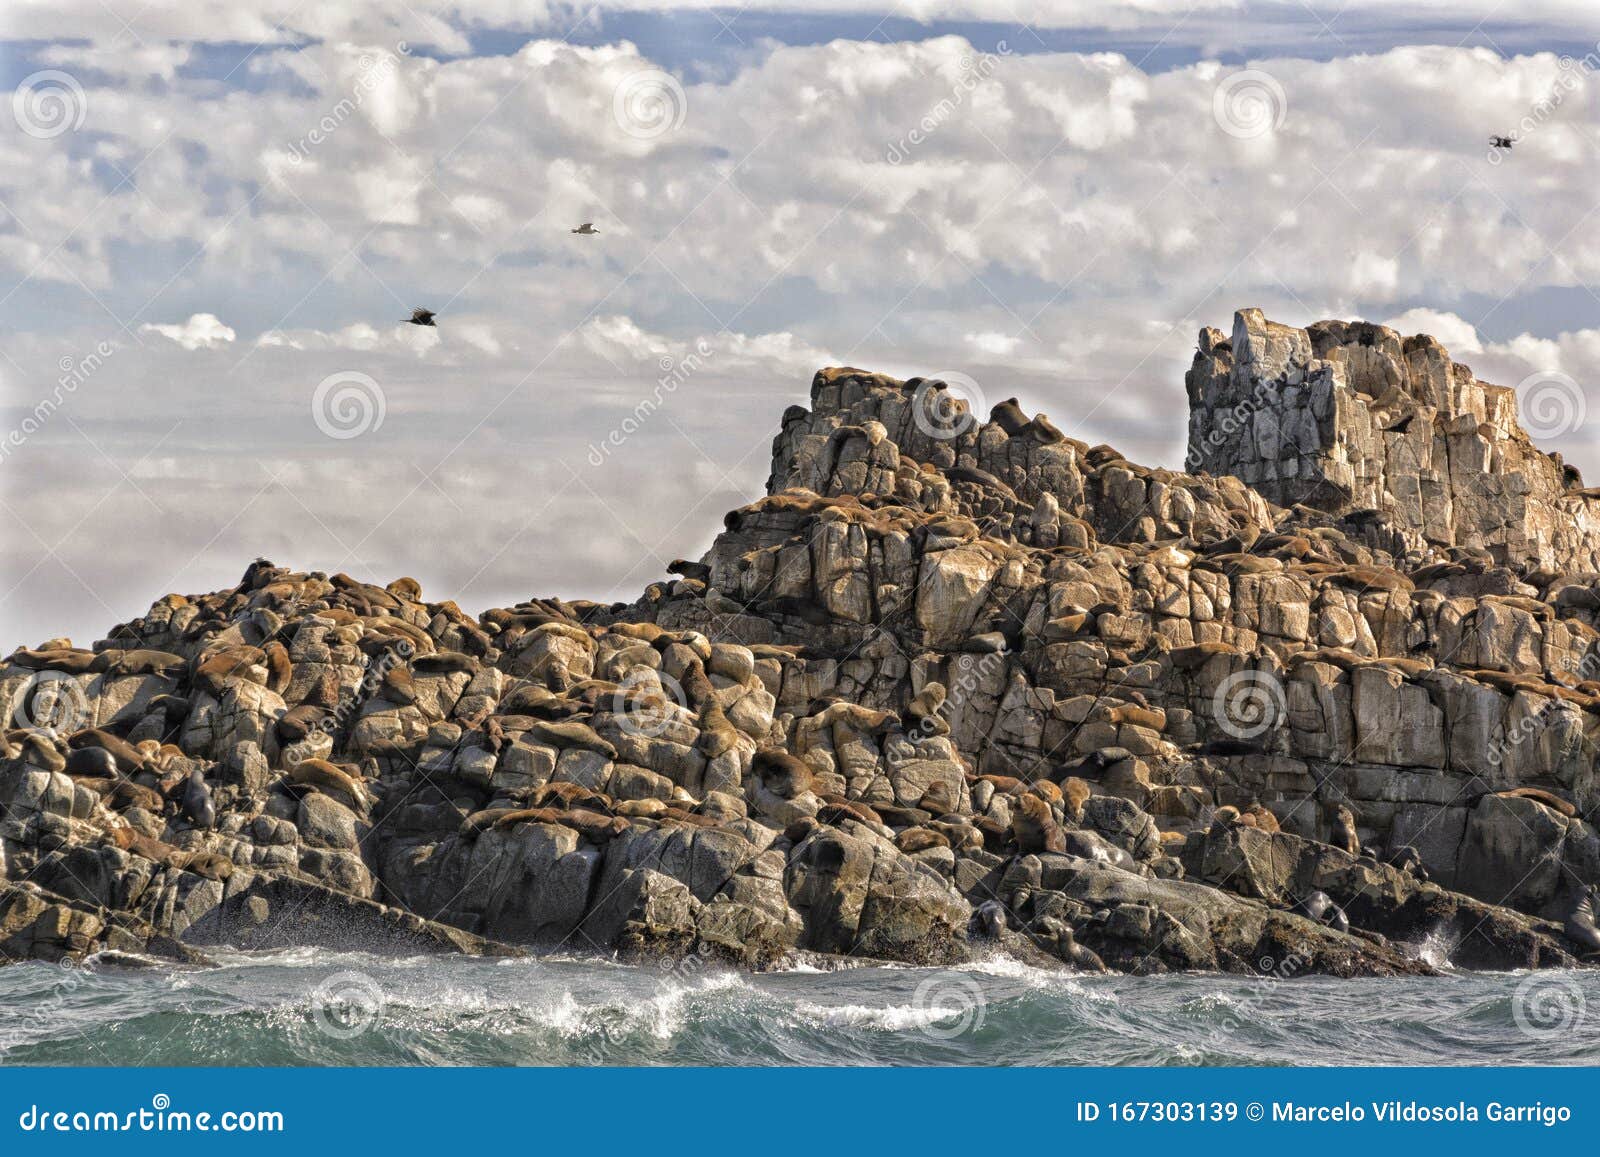 sea lions on the rock, in the nature sanctuary, off the coast of cobquecura, chile